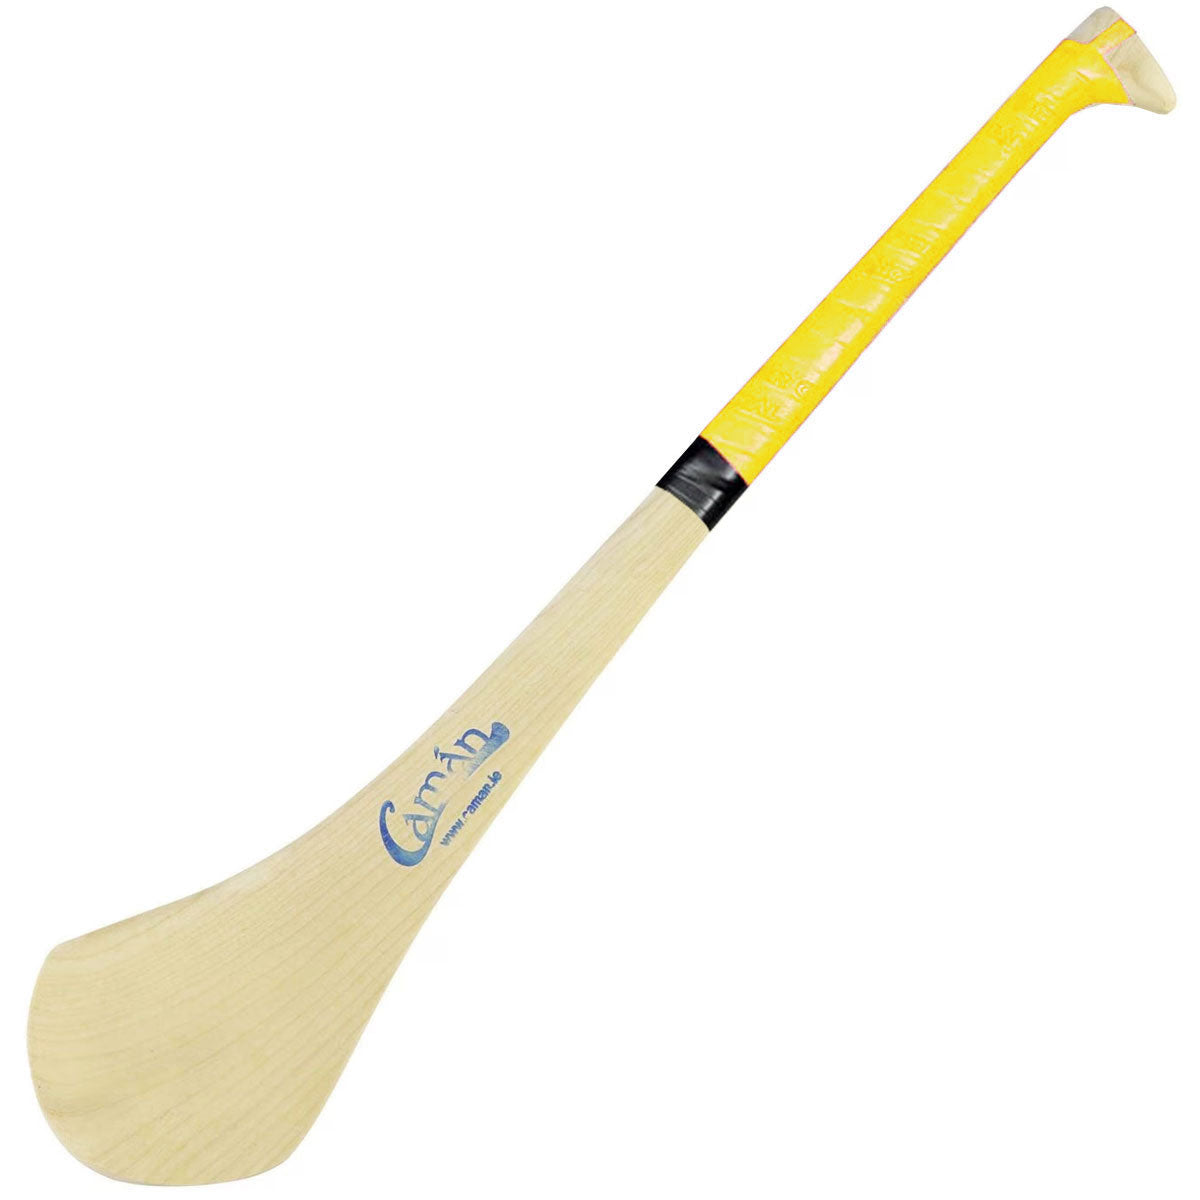 Caman Hurling Stick size 32 (Inches)